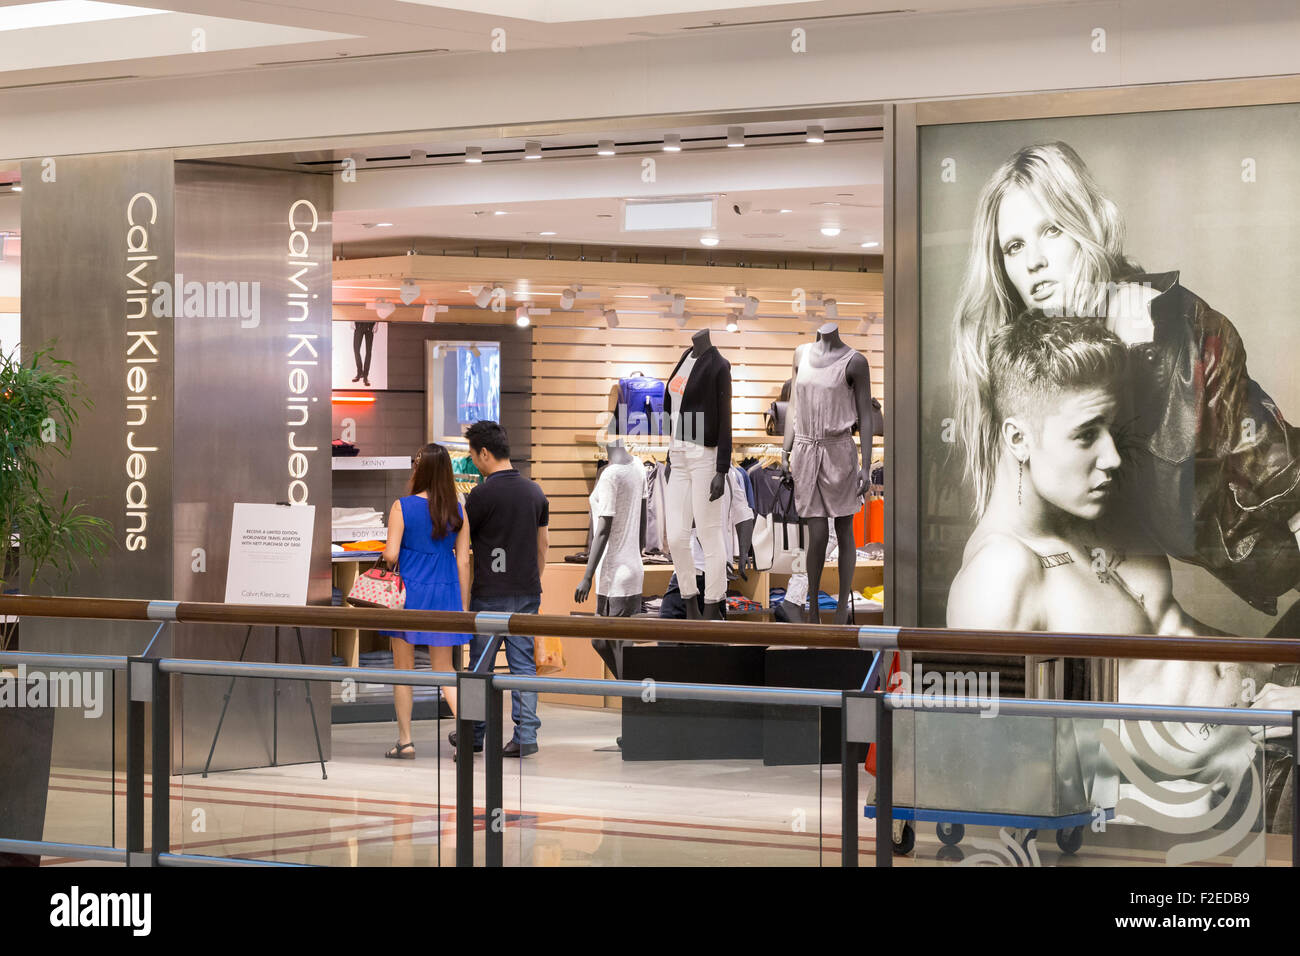 Calvin klein shop hi-res stock photography and images - Alamy